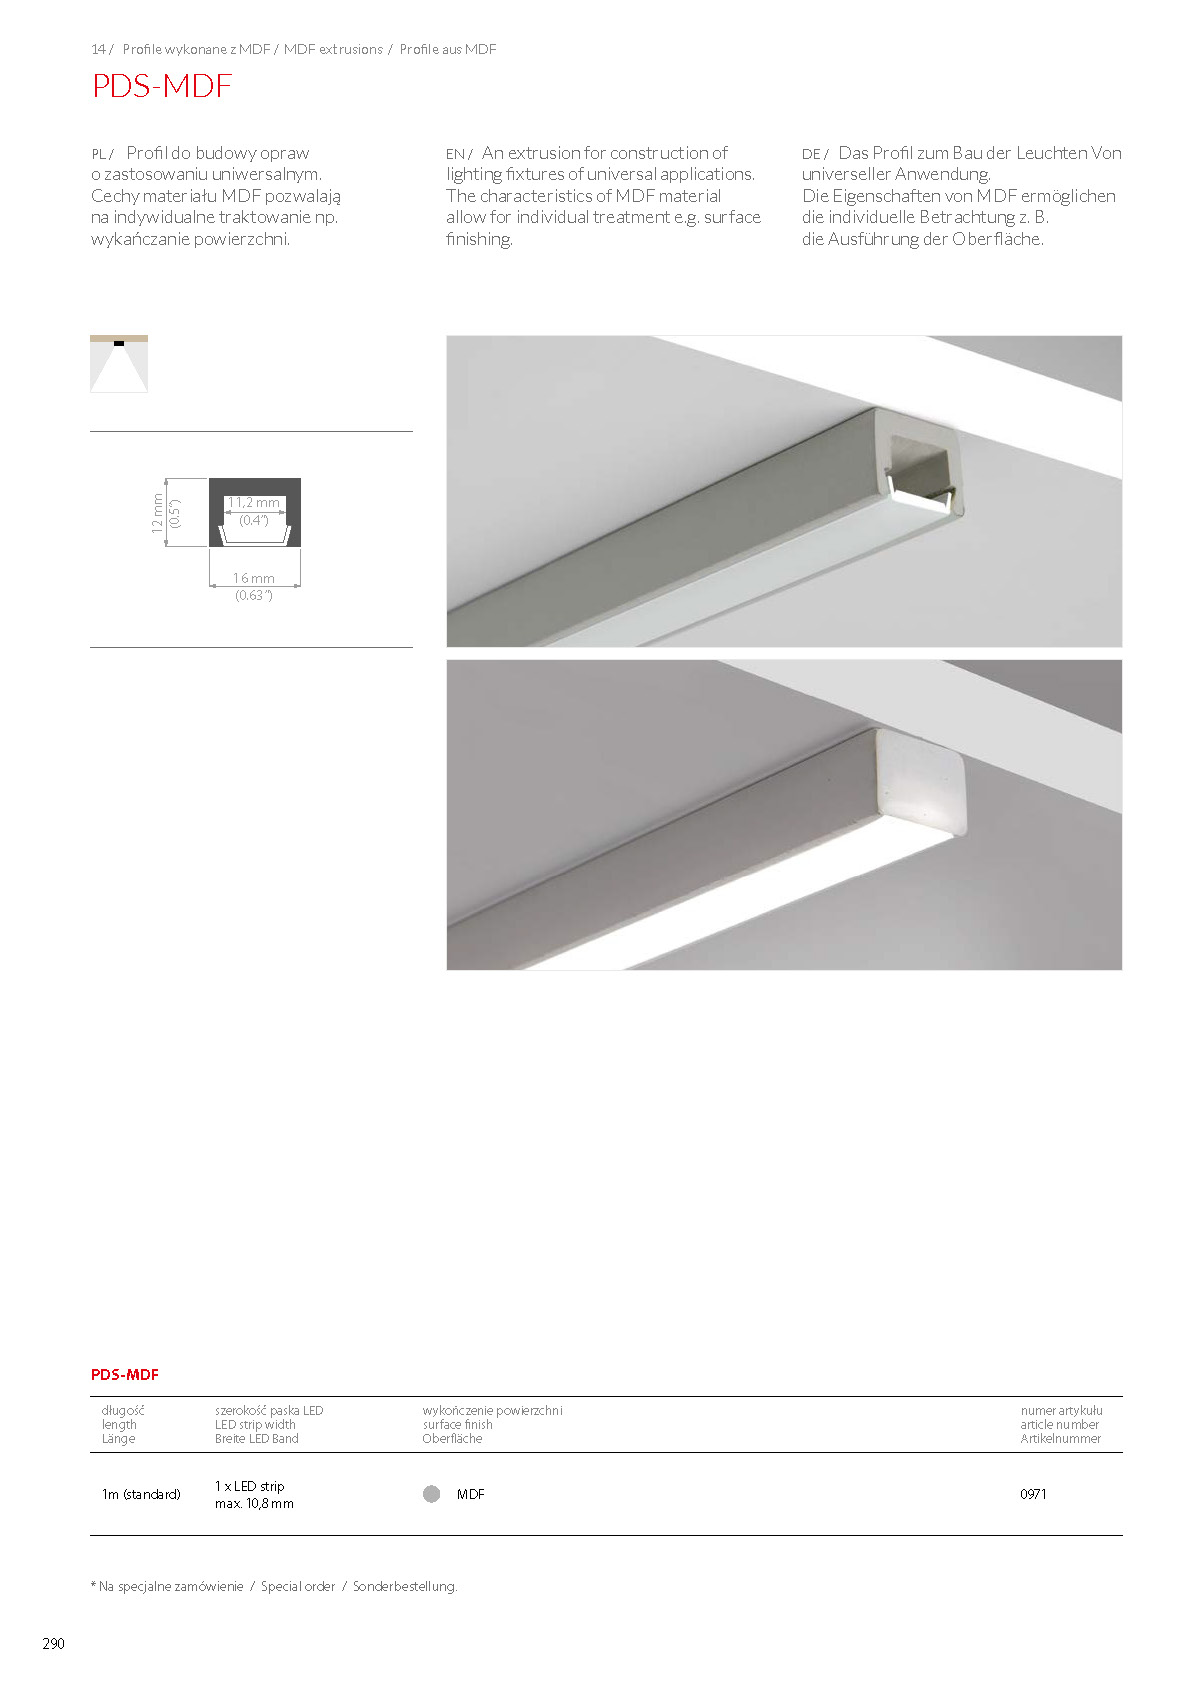 PDS-MDF, profile | stair-lighting.com, 0971 profile, PDS-MDF klus profile, PDS-MDF channel, 